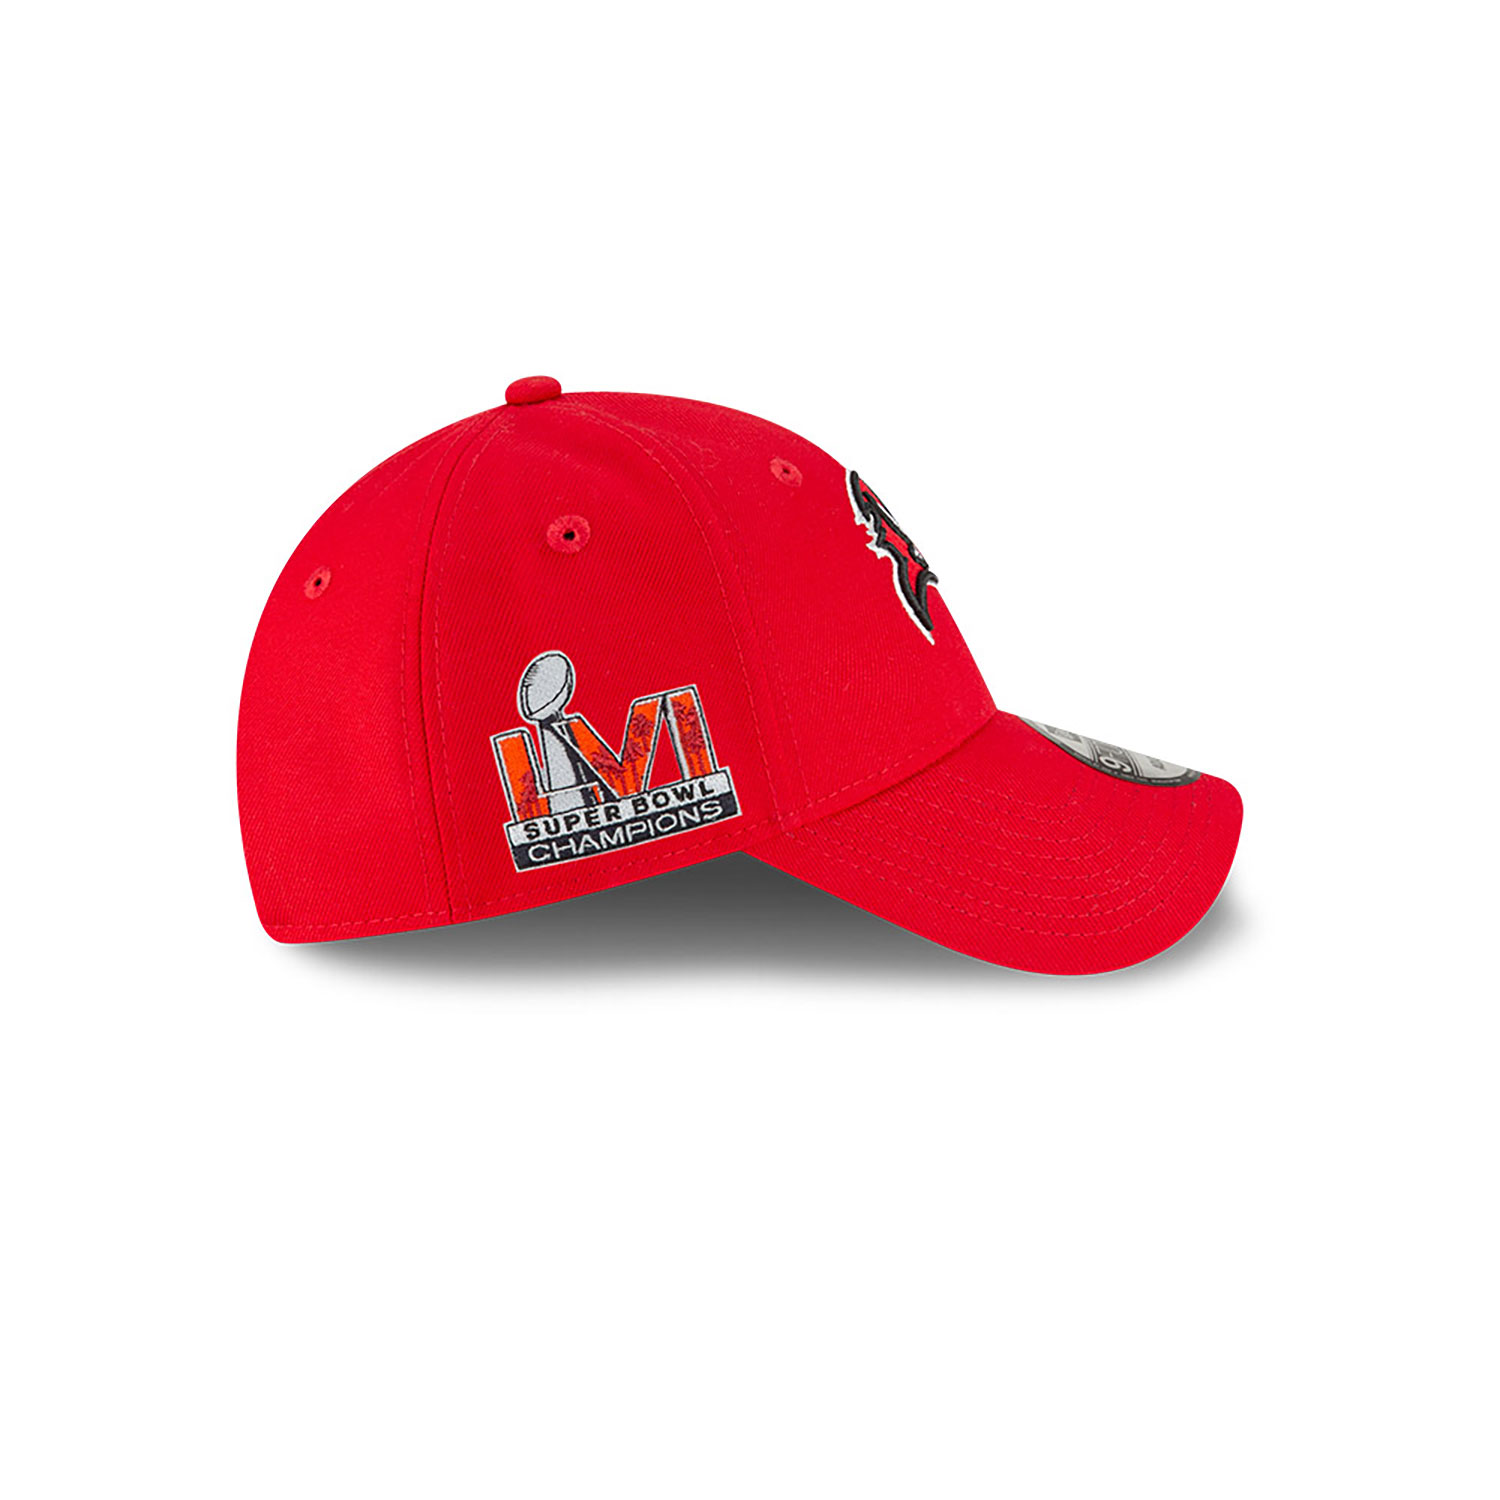 Tampa Bay Buccaneers Youth The League Red 9FORTY Adjustable Cap